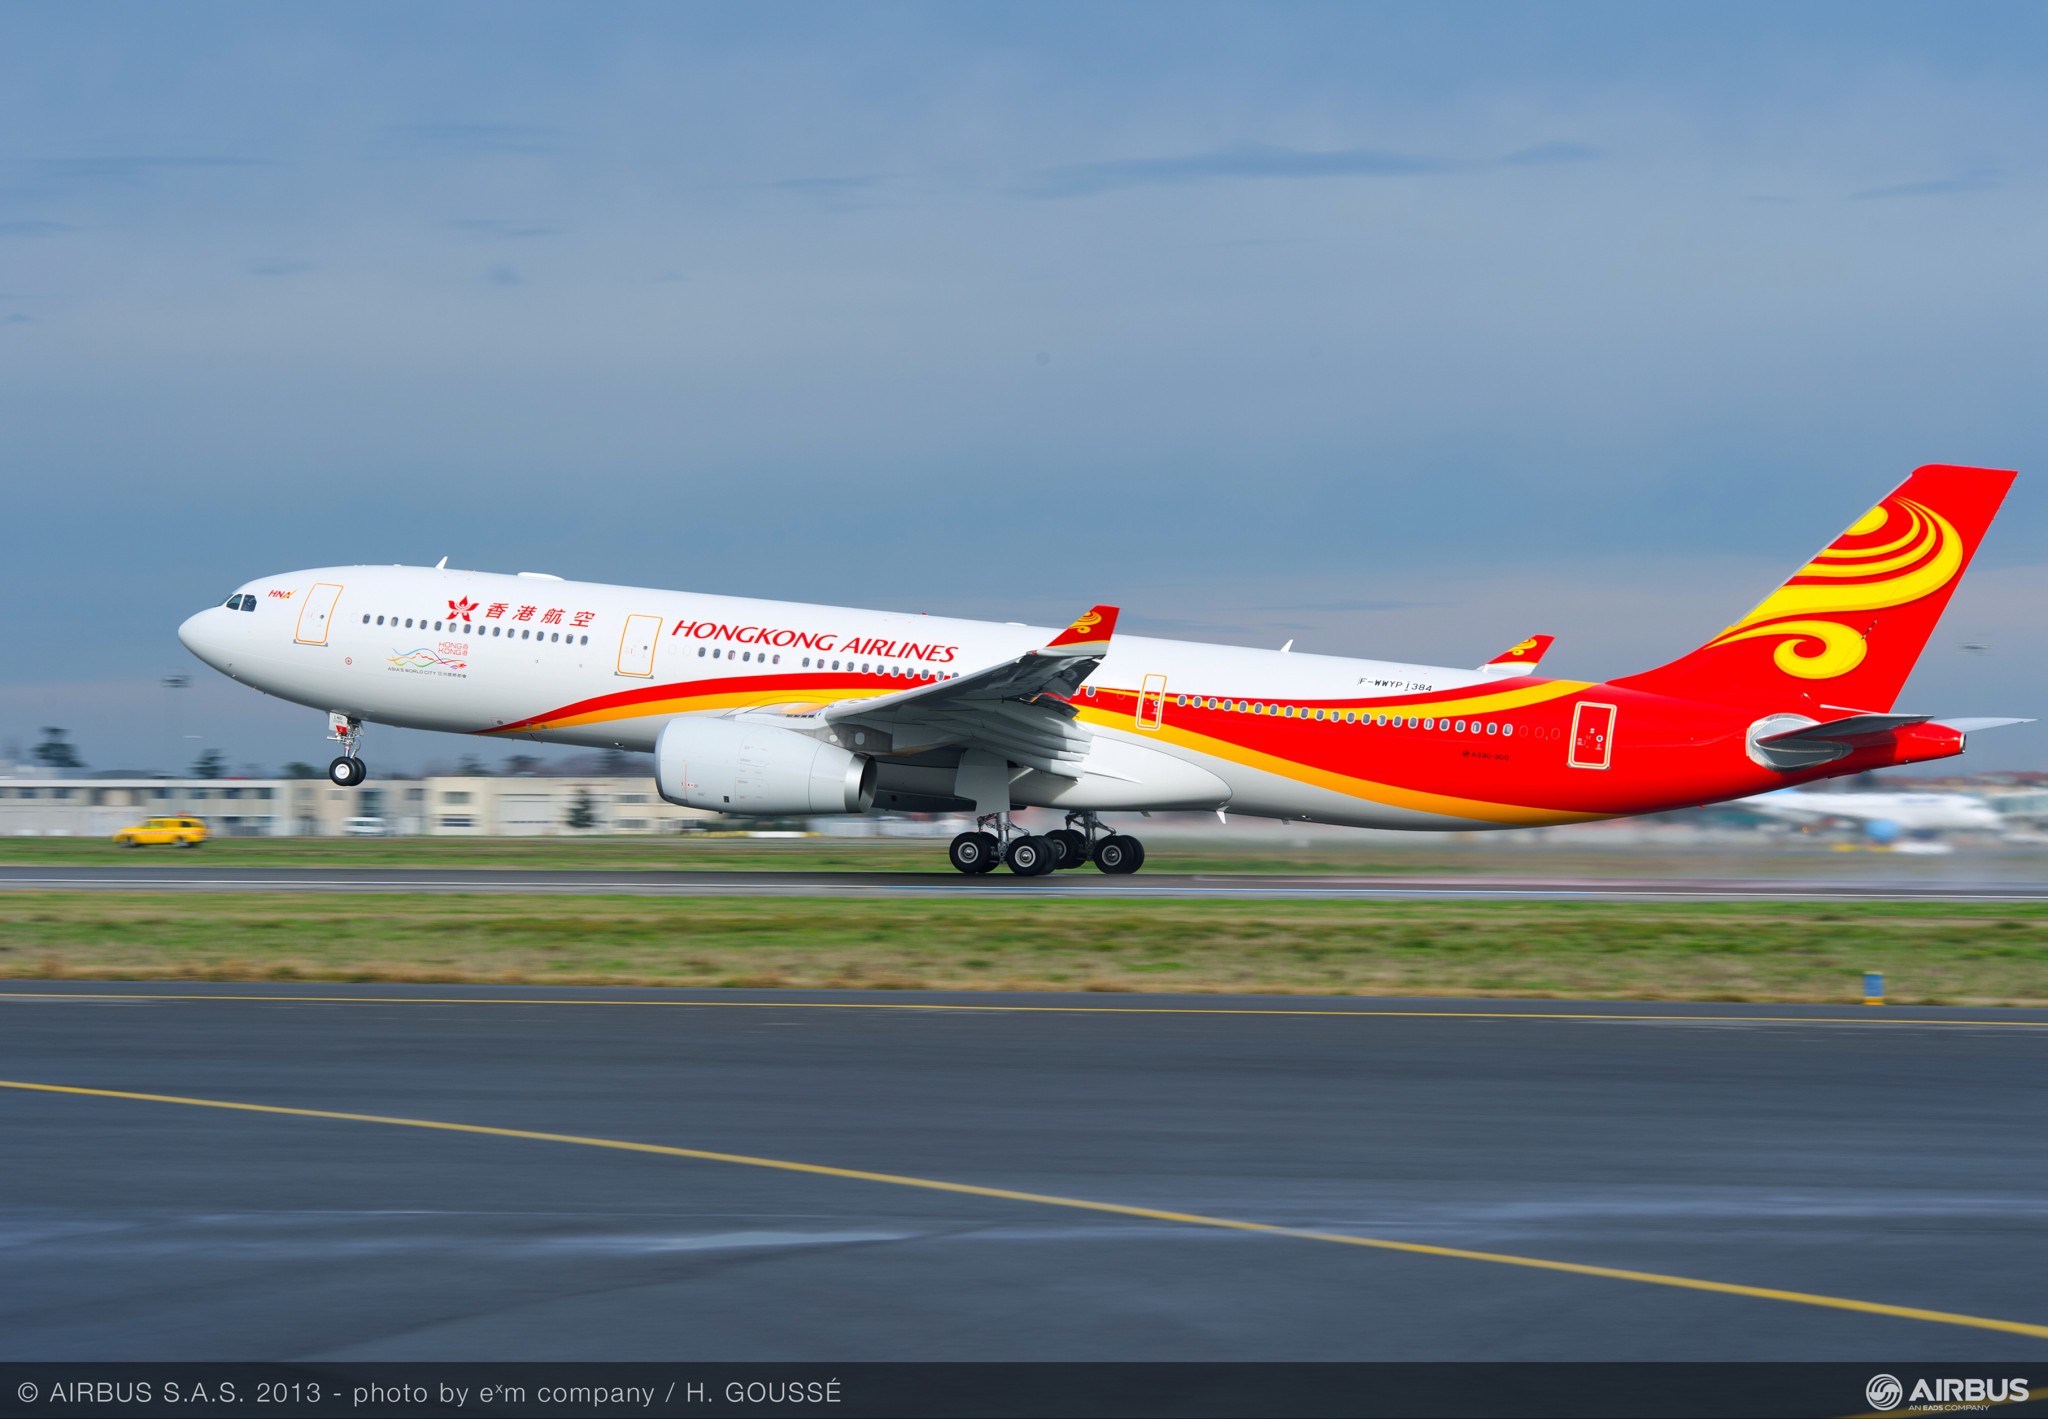 Hong Kong Airlines plans to reach 75% operating capacity in 2023